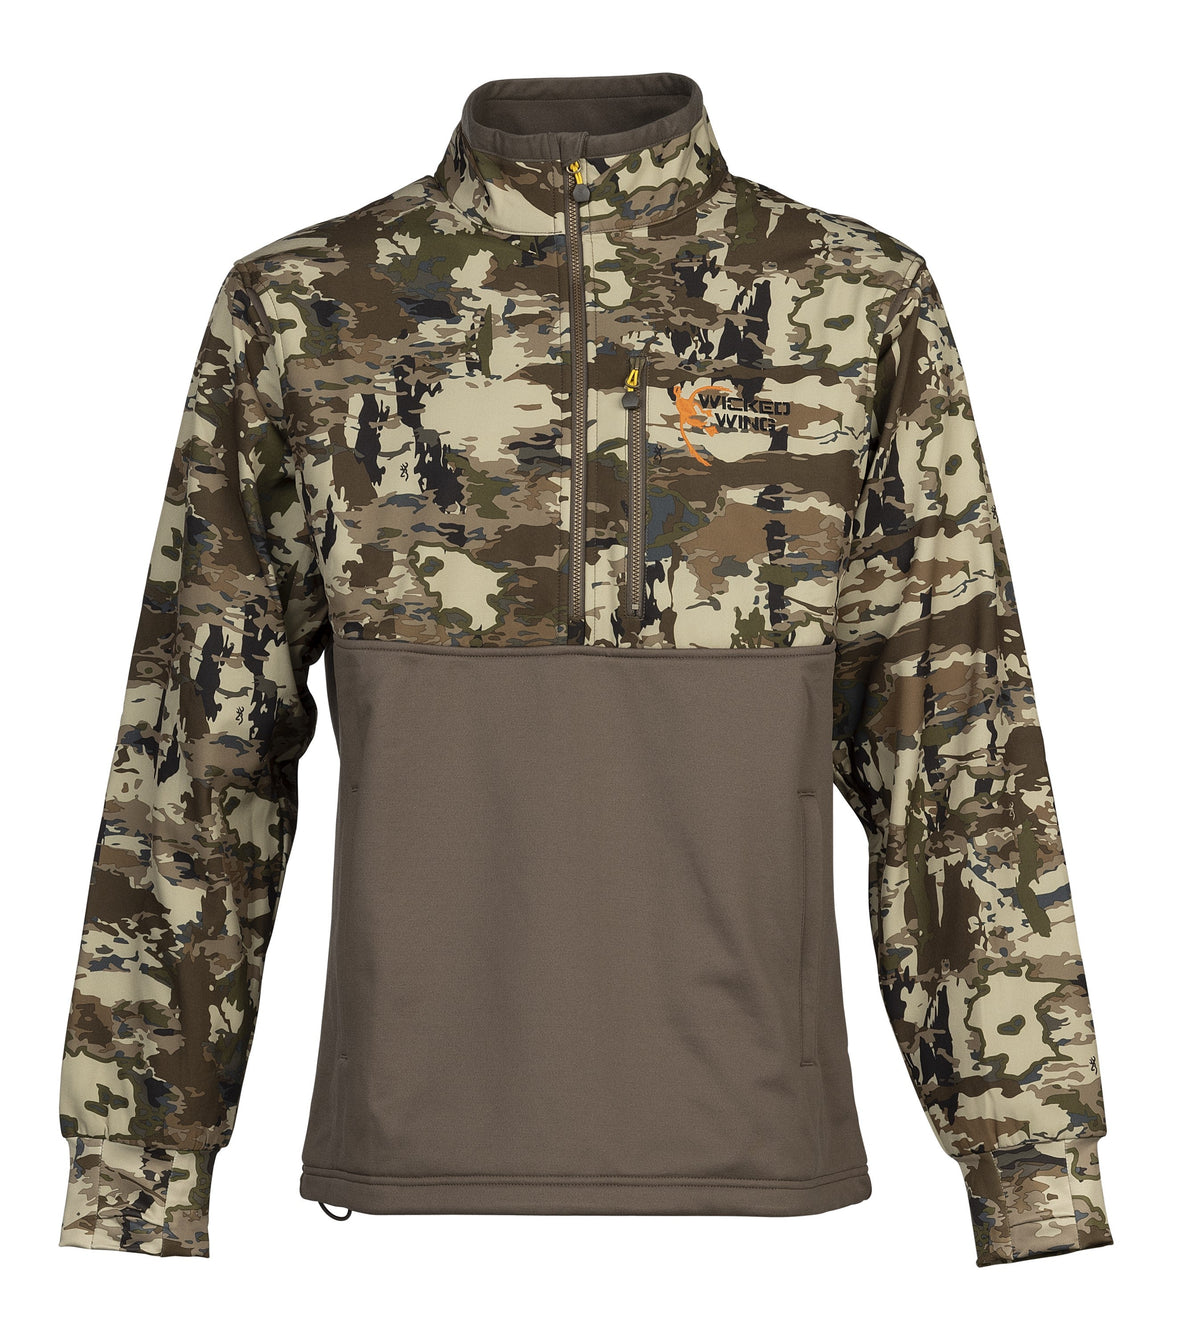 SHT,WW,SMOOTHBORE 1/4ZIP,AURIC,S